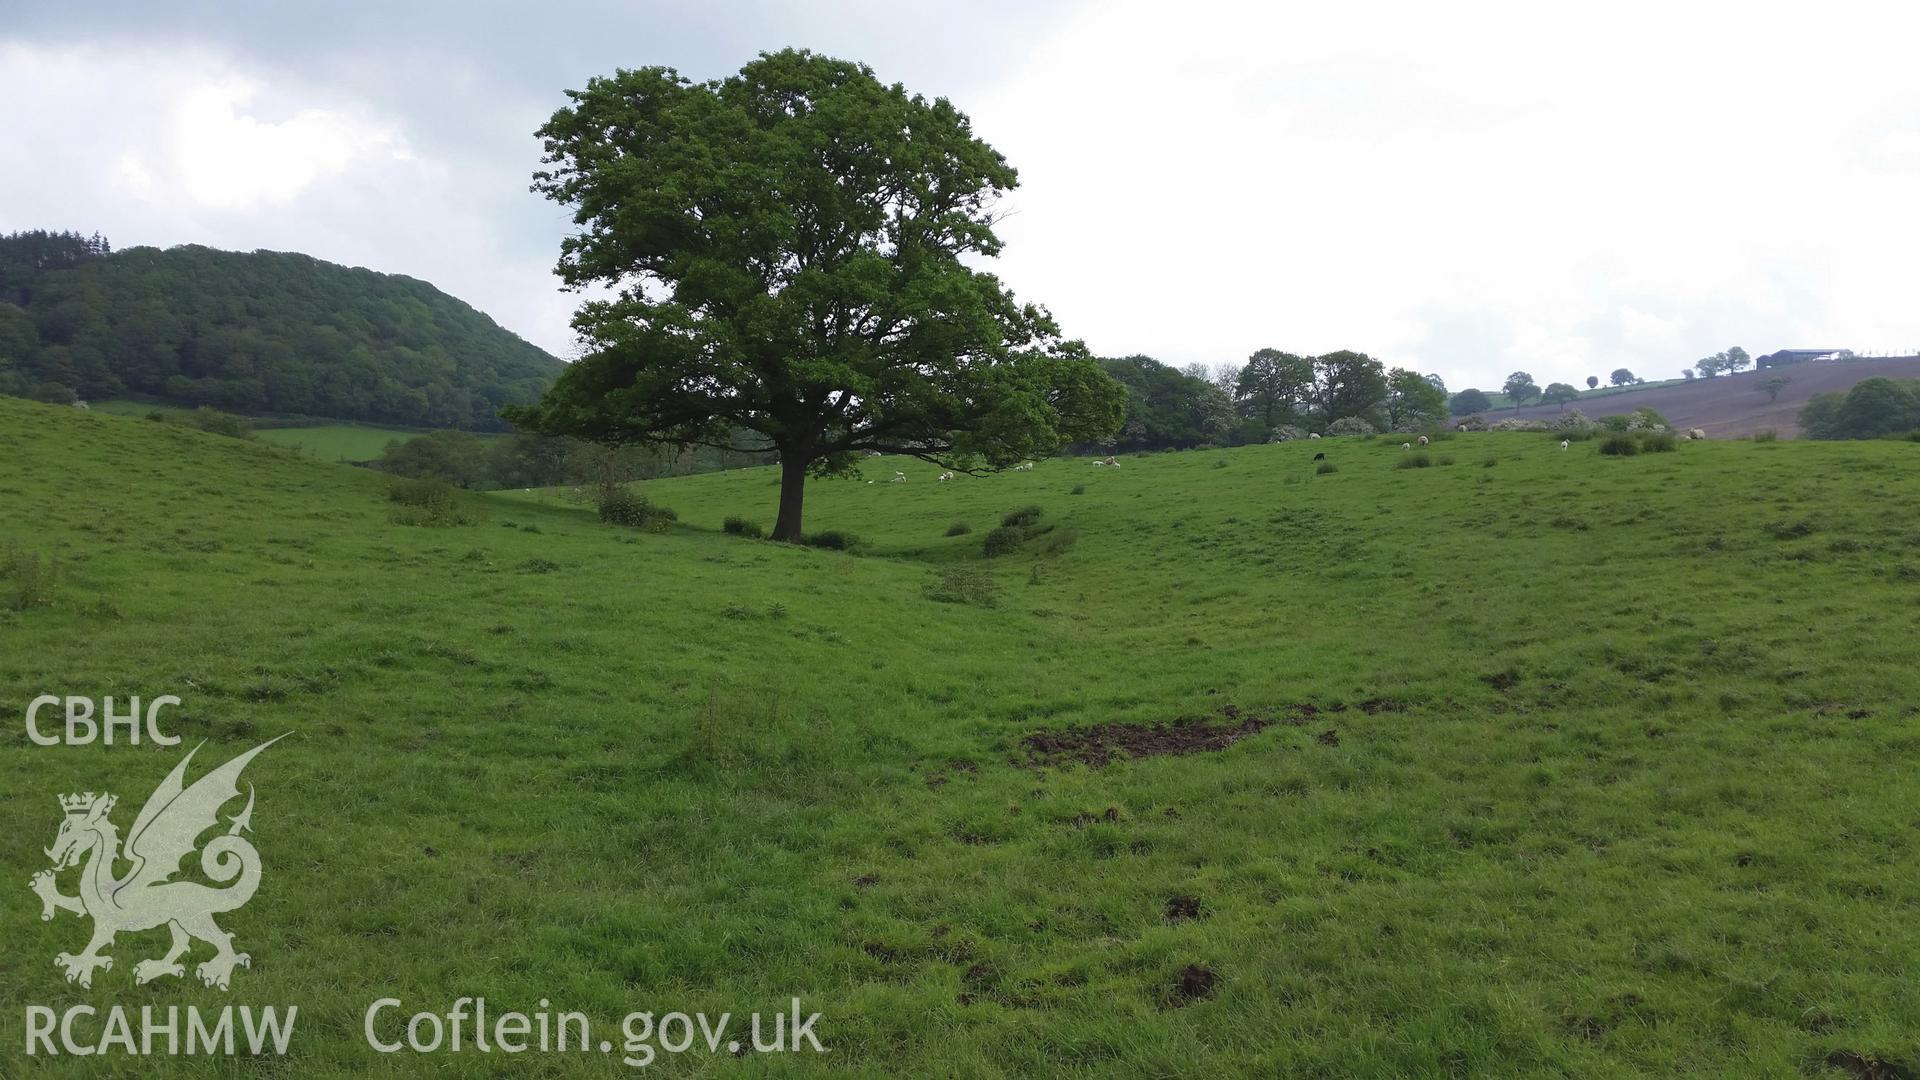 Digital colour photograph of the Maes Moydog battlefield. Photographed during Phase Three of the Welsh Battlefield Metal Detector Survey, carried out by Archaeology Wales, 2012-2014. Project code: 2041 - WBS/12/SUR.